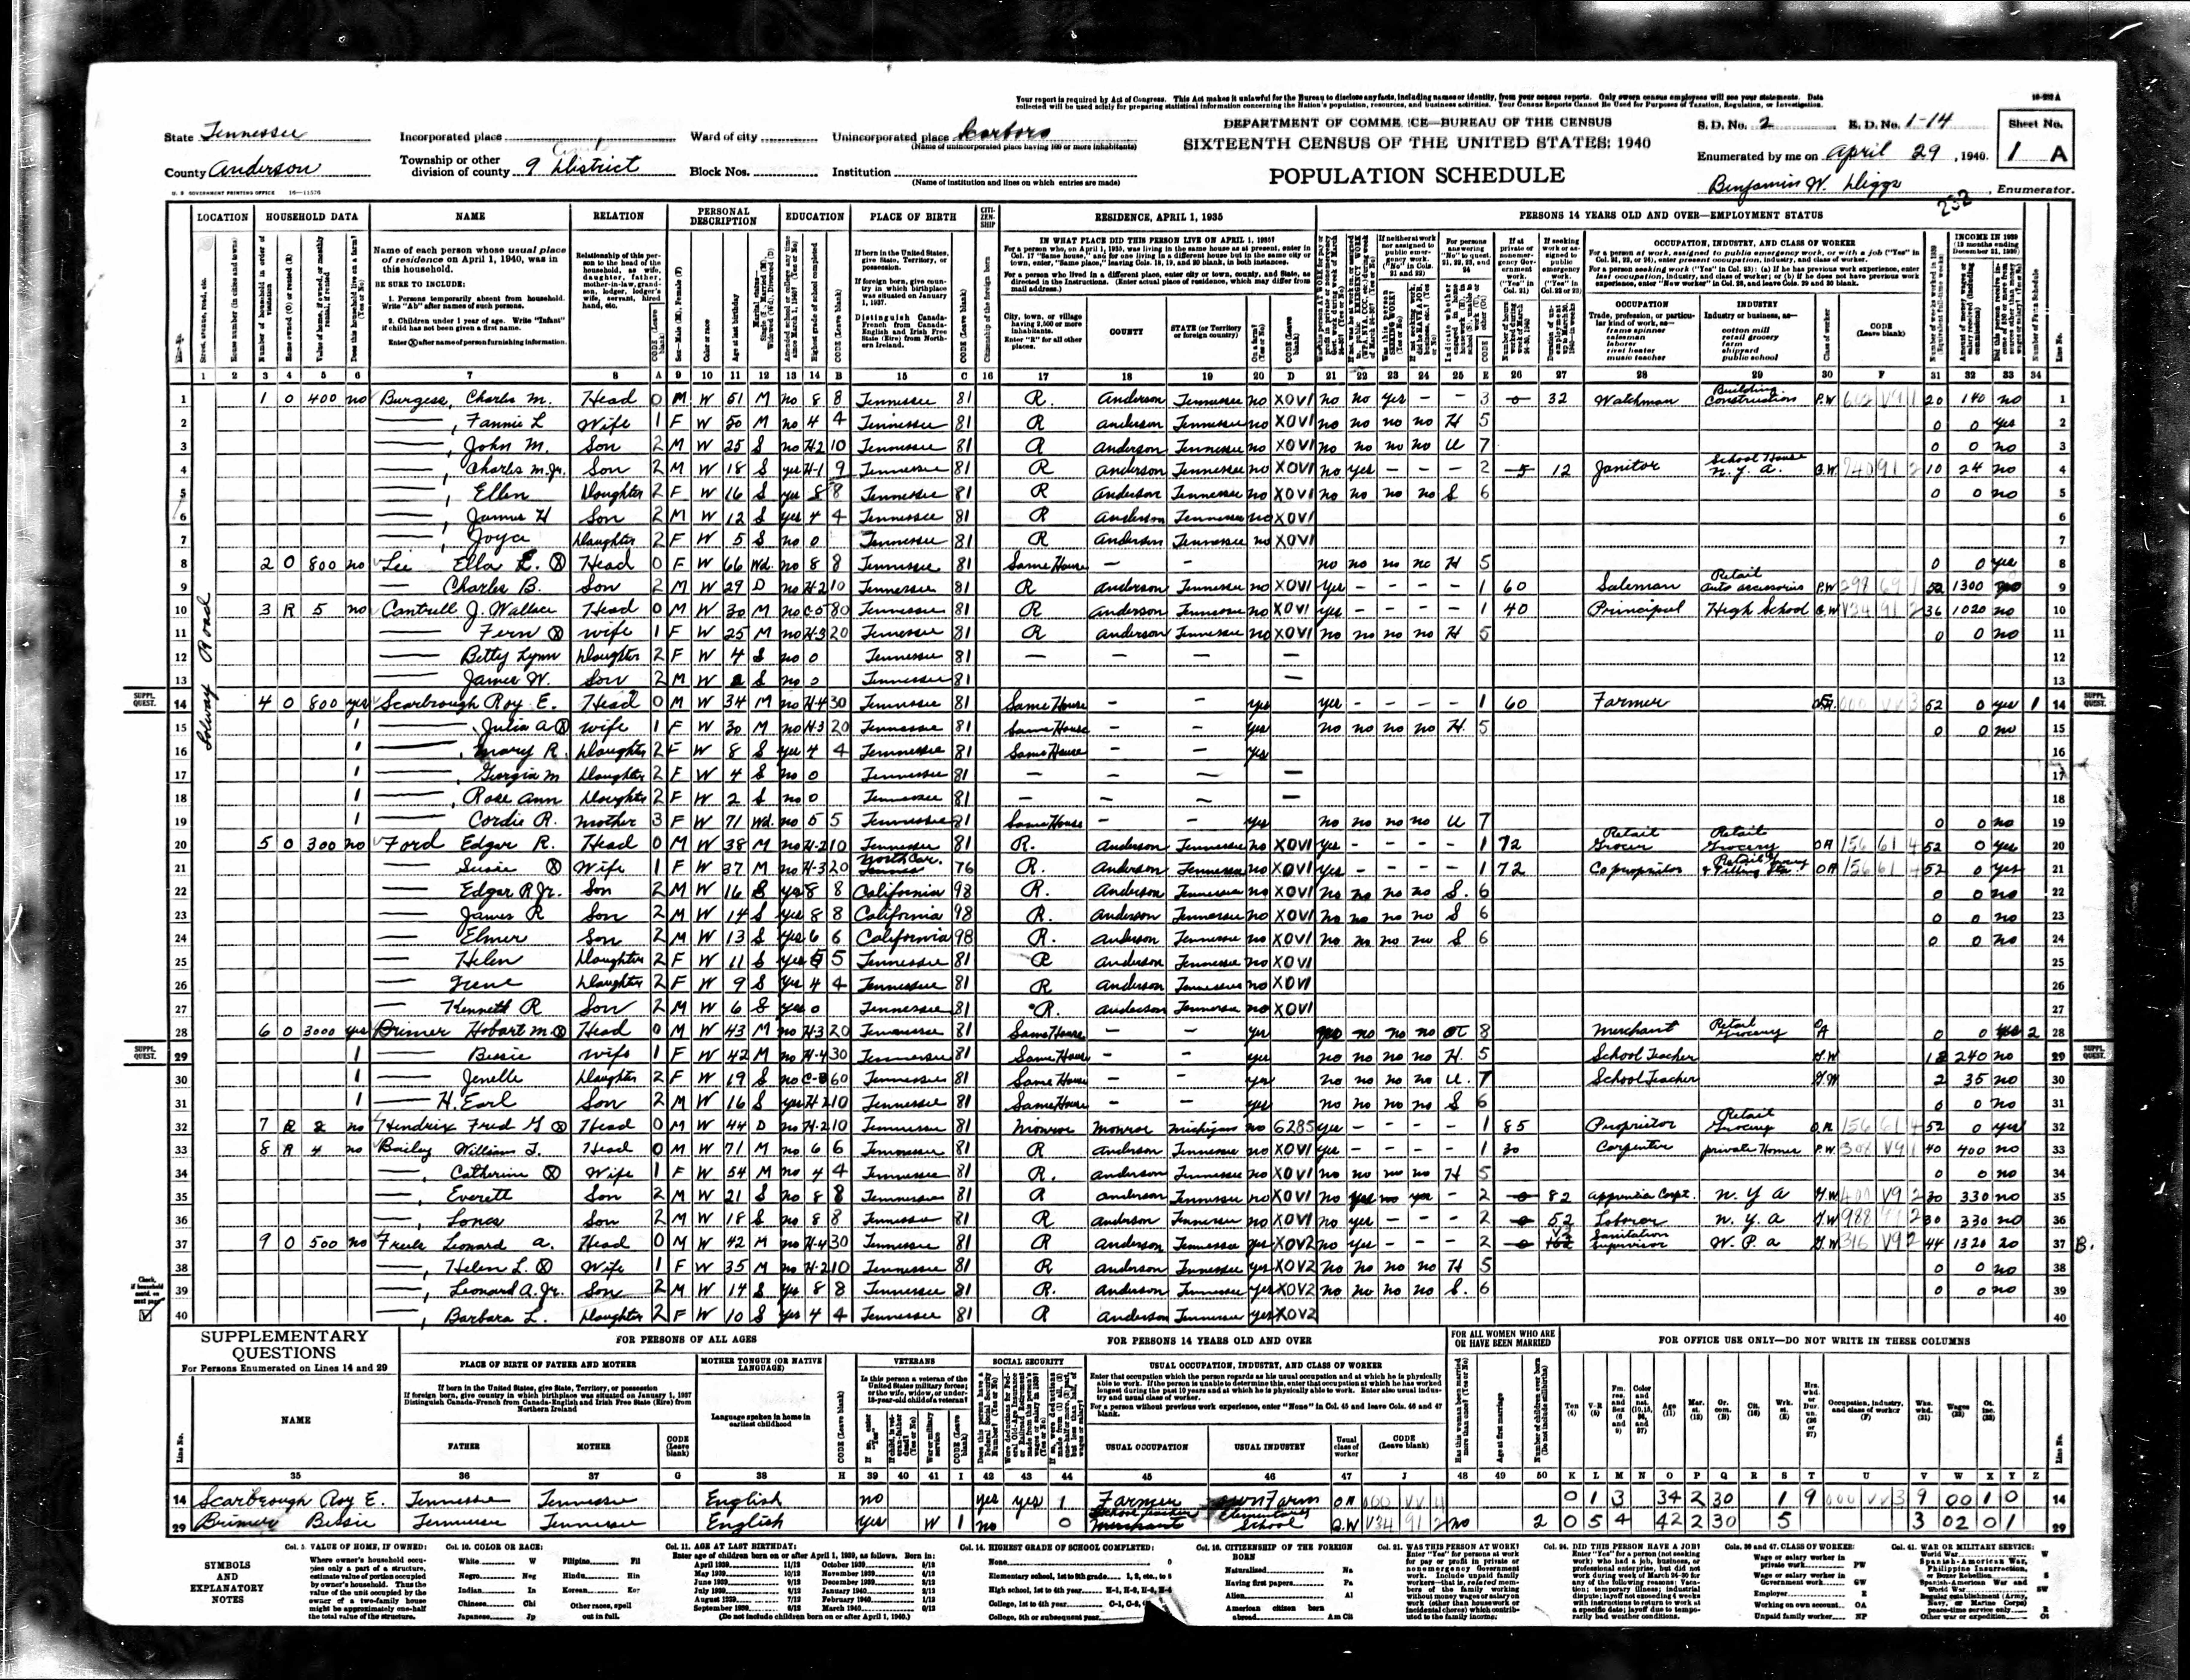 1940 U.S. Census, Anderson County, Tennessee, Dist. 9, page 232a